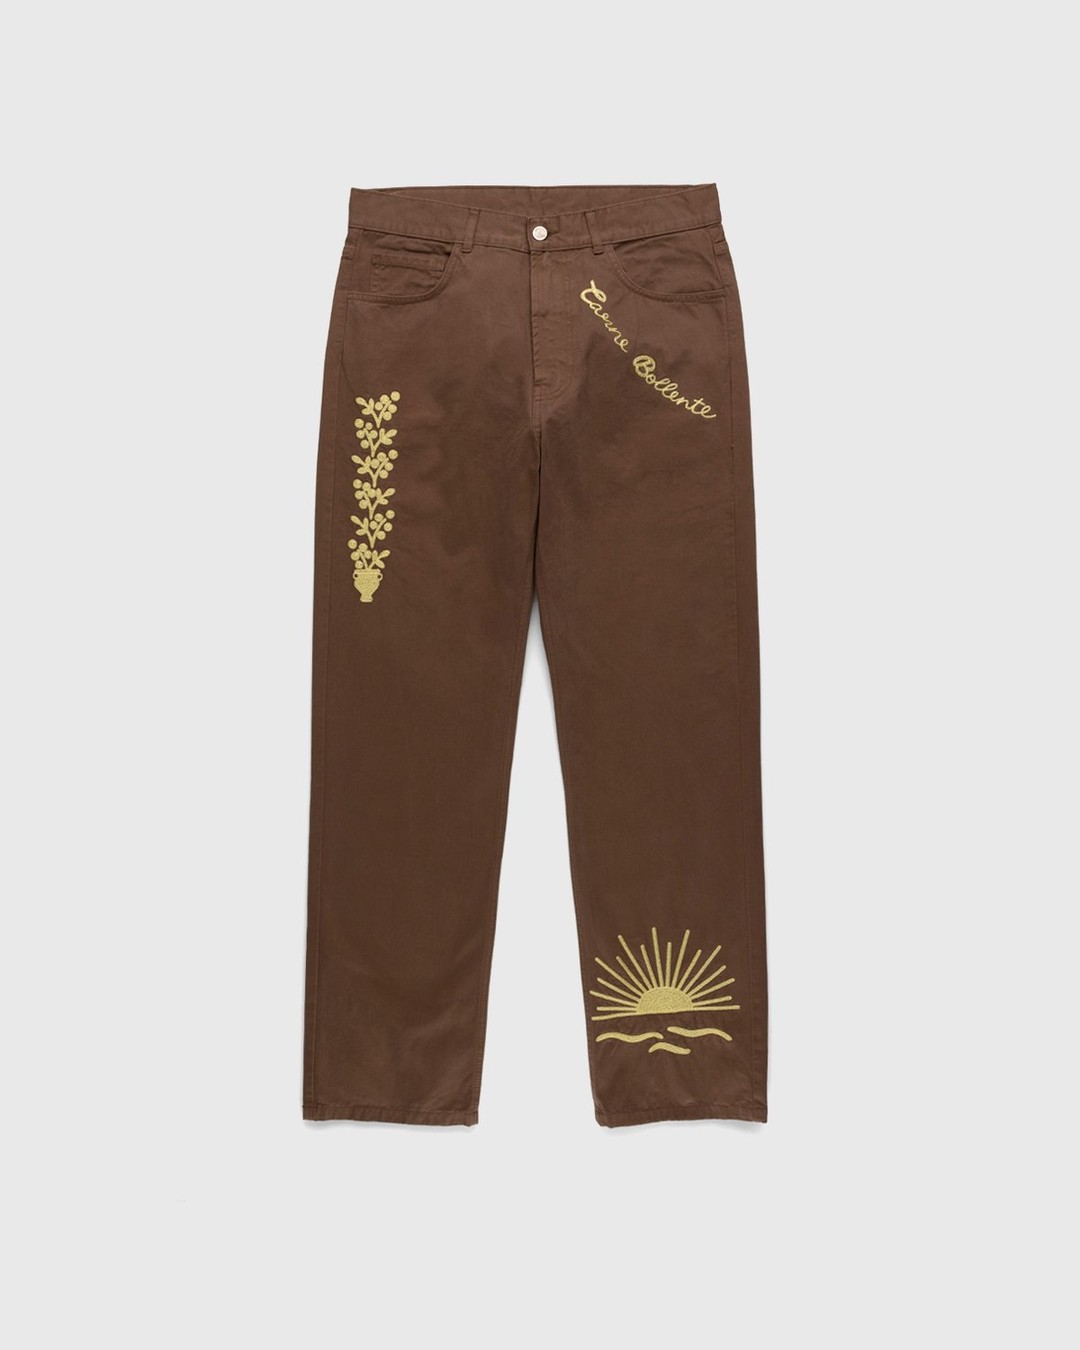 Carne Bollente – The Back Bump Trouser Brown - Pants - Brown - Image 1